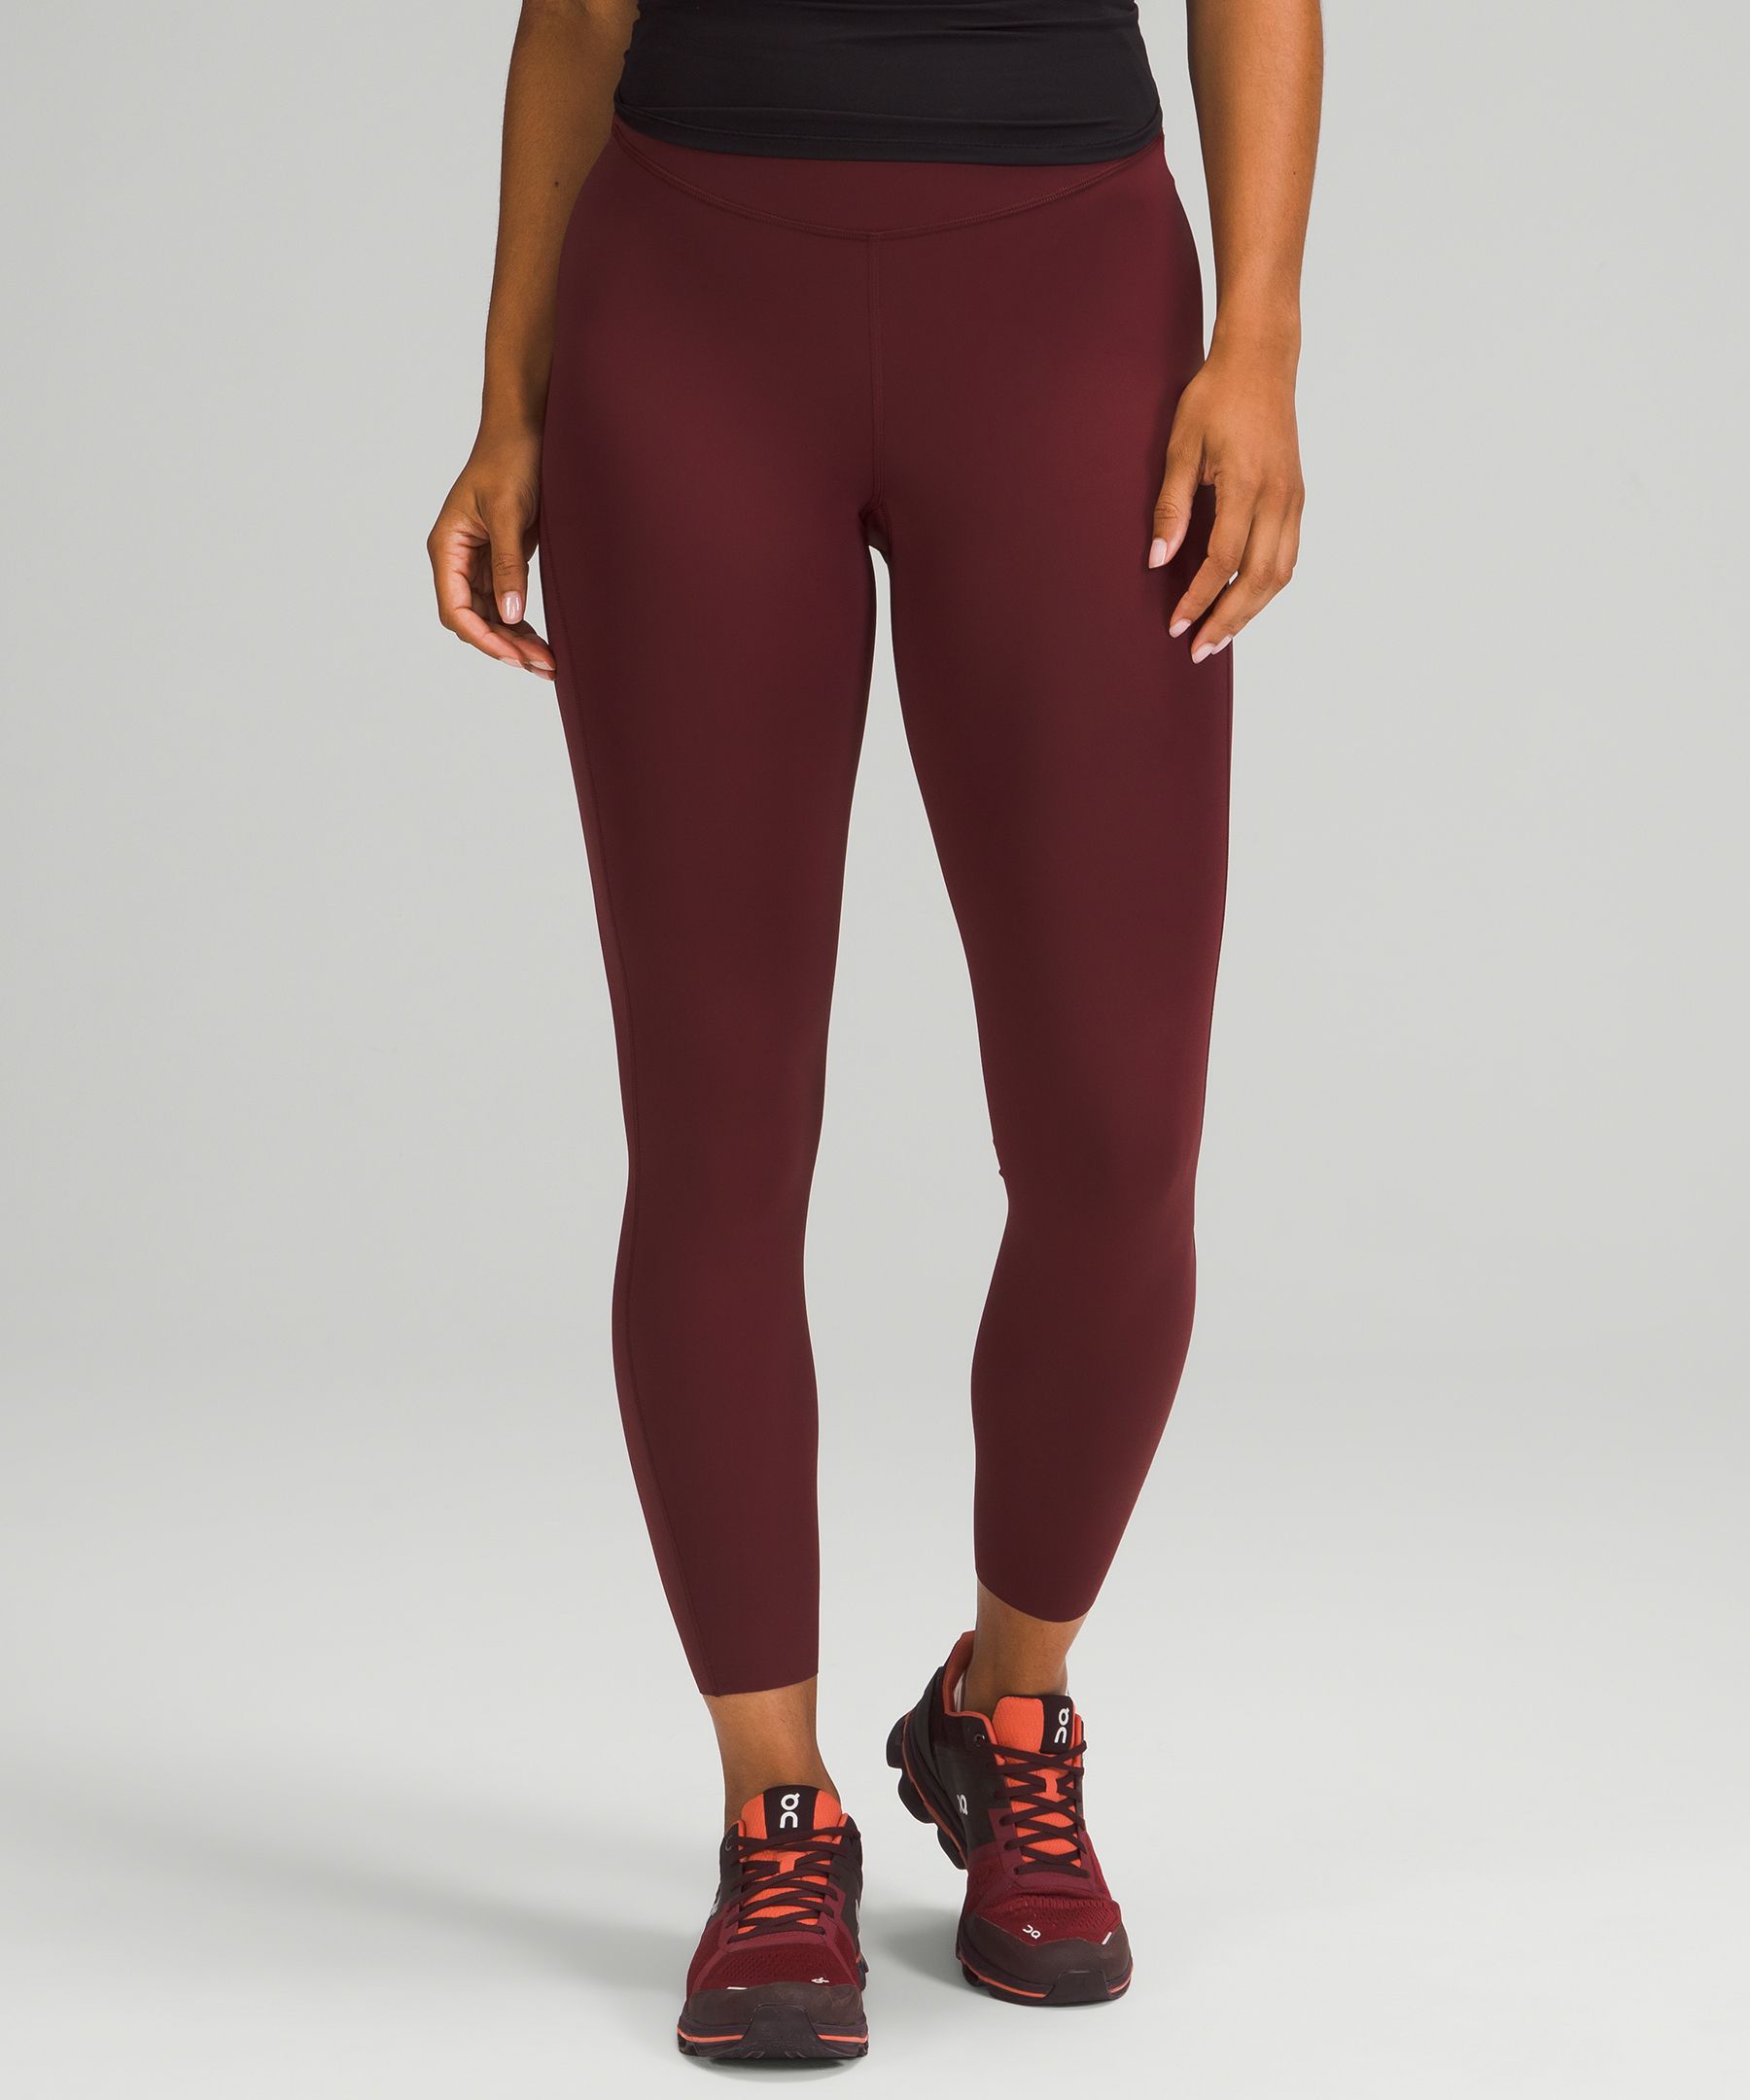 Lululemon Base Pace High-rise Running Tights 25 In Red Merlot